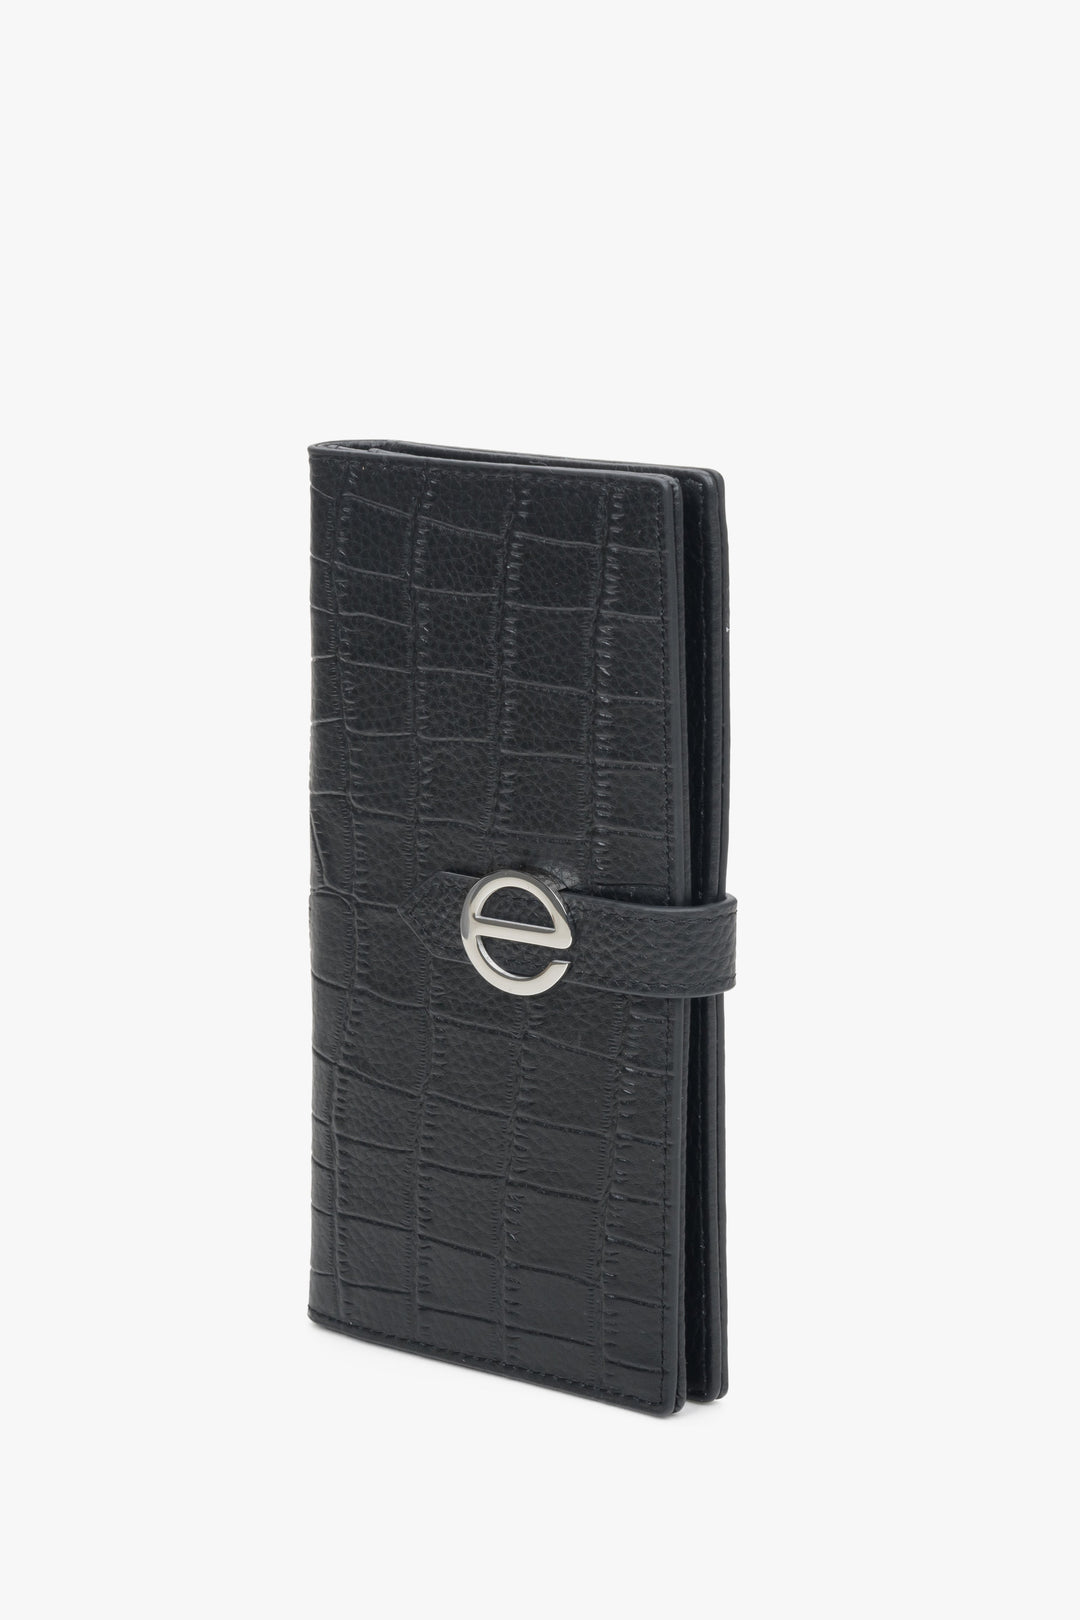 Large black women's wallet with silver fittings by Estro.